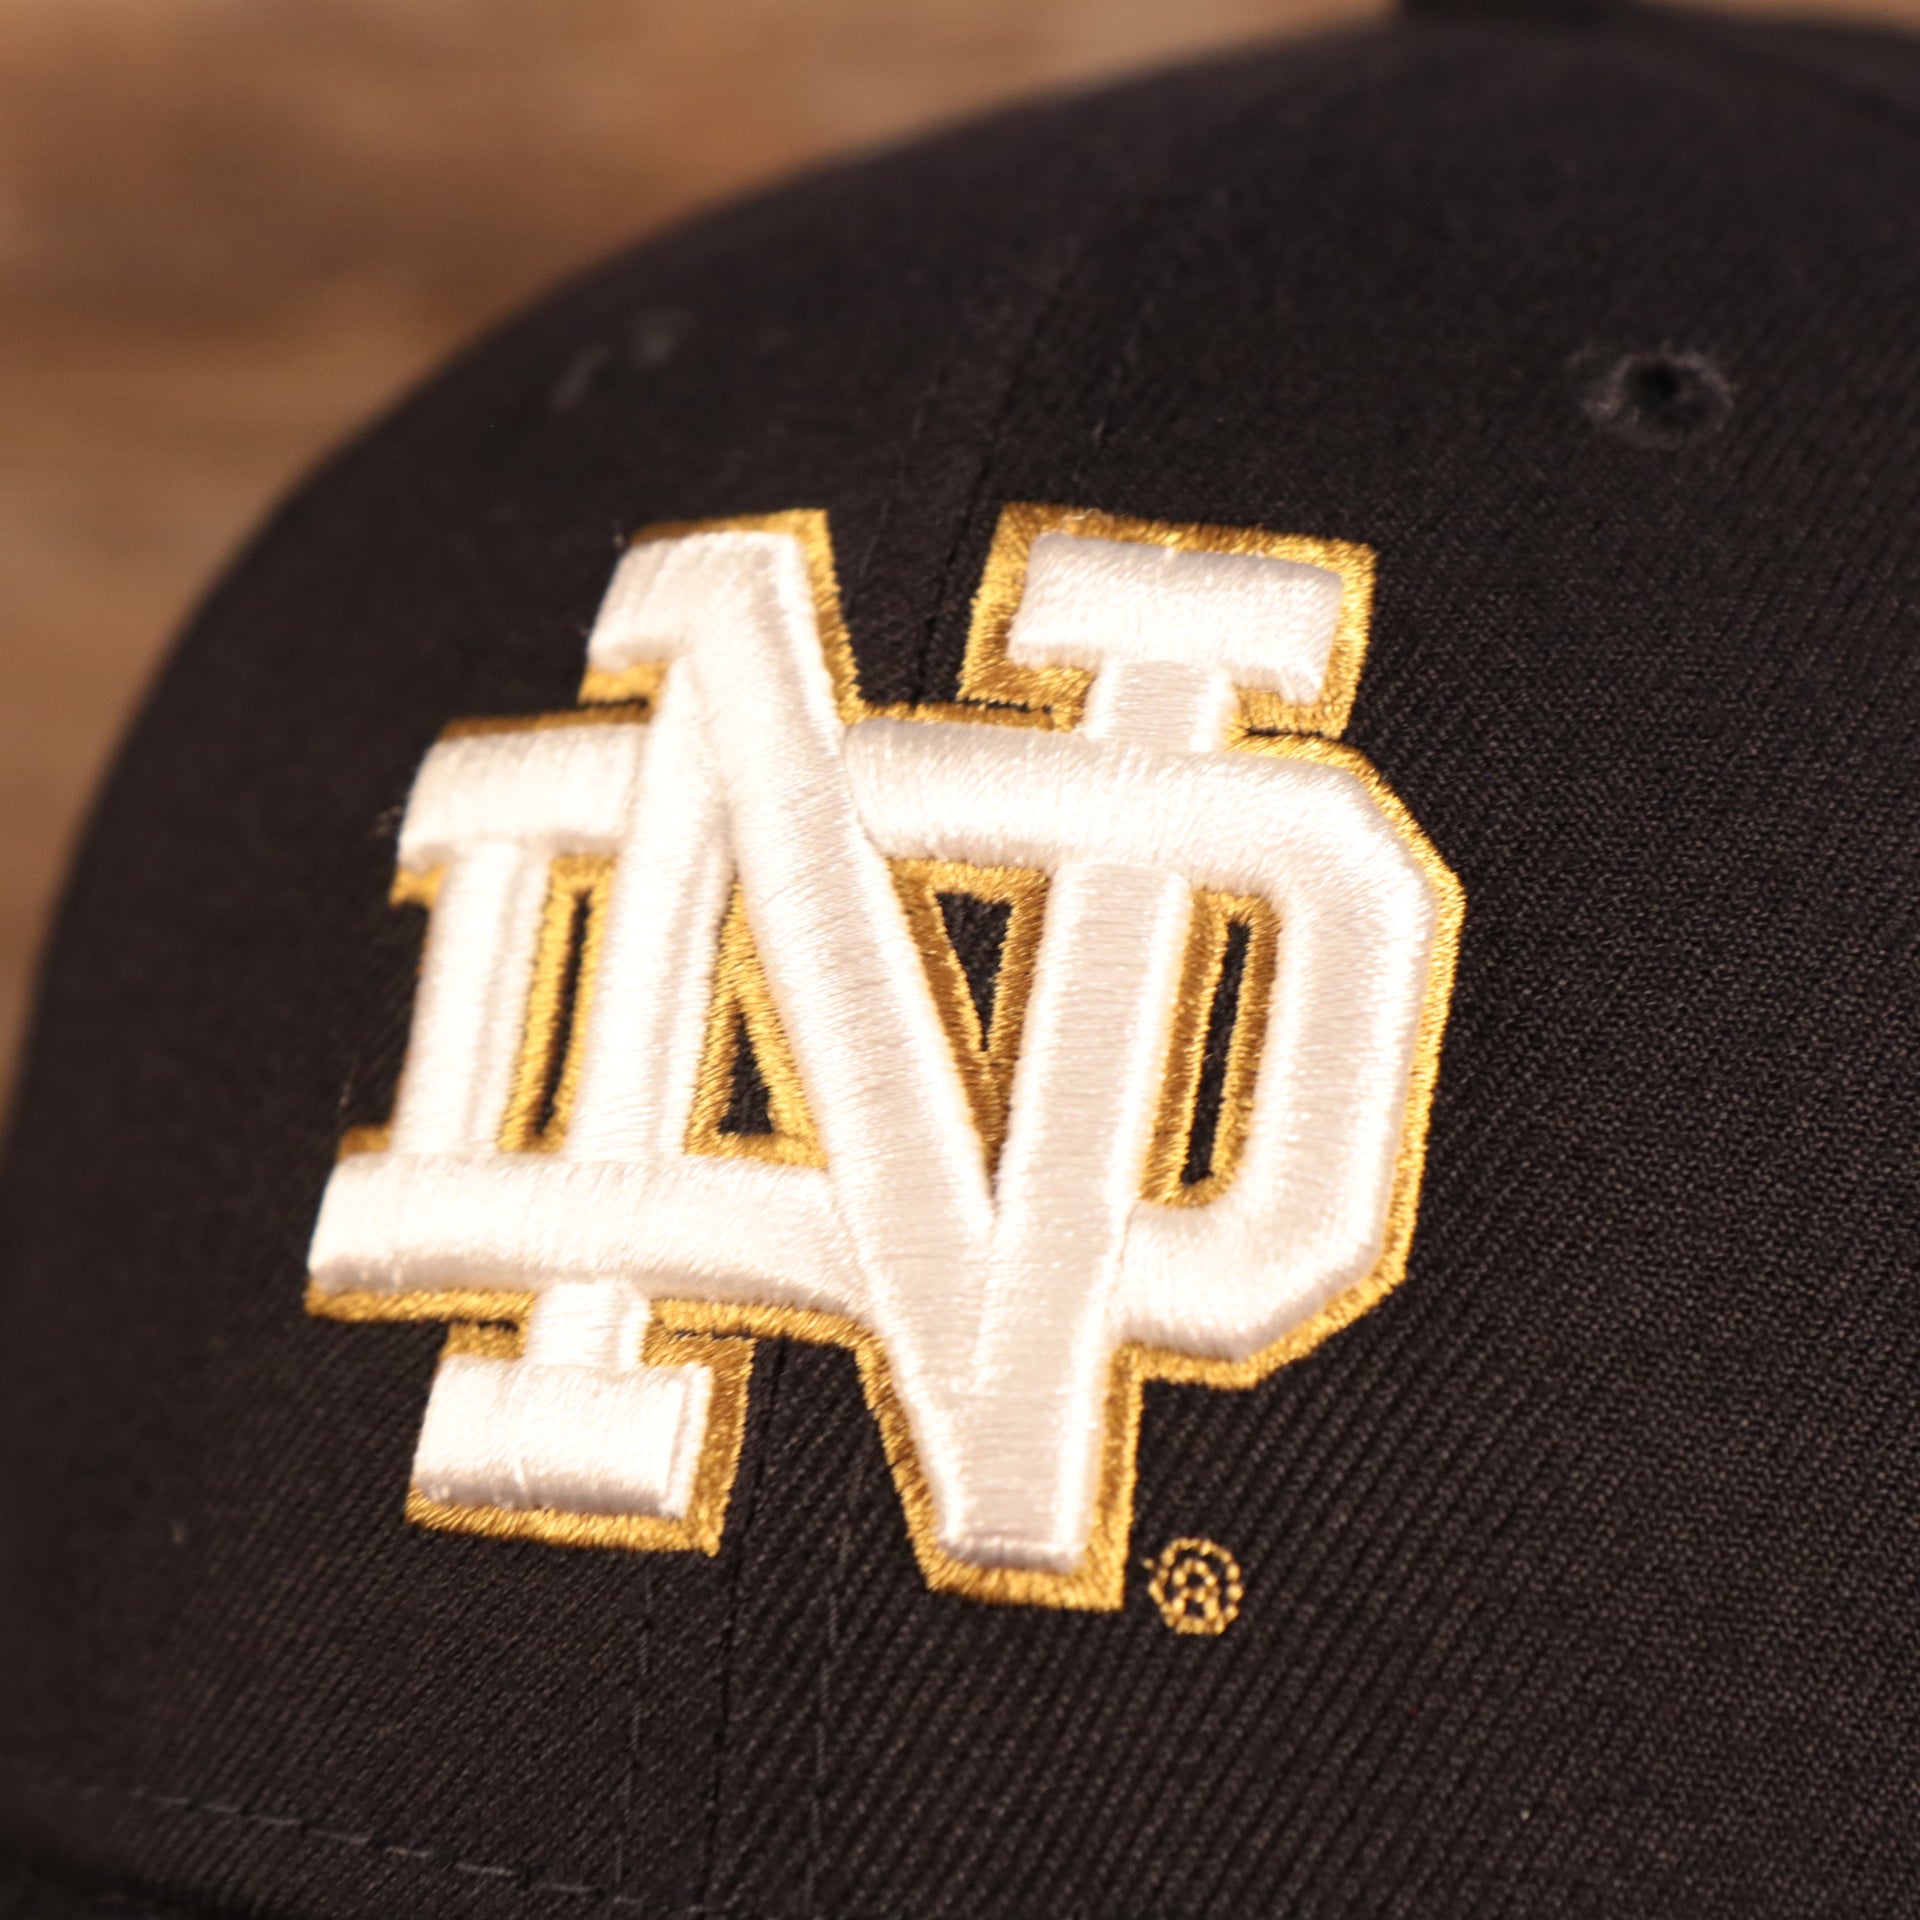 NEW ERA | NOTRE DAME FIGHTIN IRISH | THE LEAGUE | 9FORTY DAD HAT | VELCRO ADJUSTABLE | TEAM BACK PATCH | NAVY | OSFM